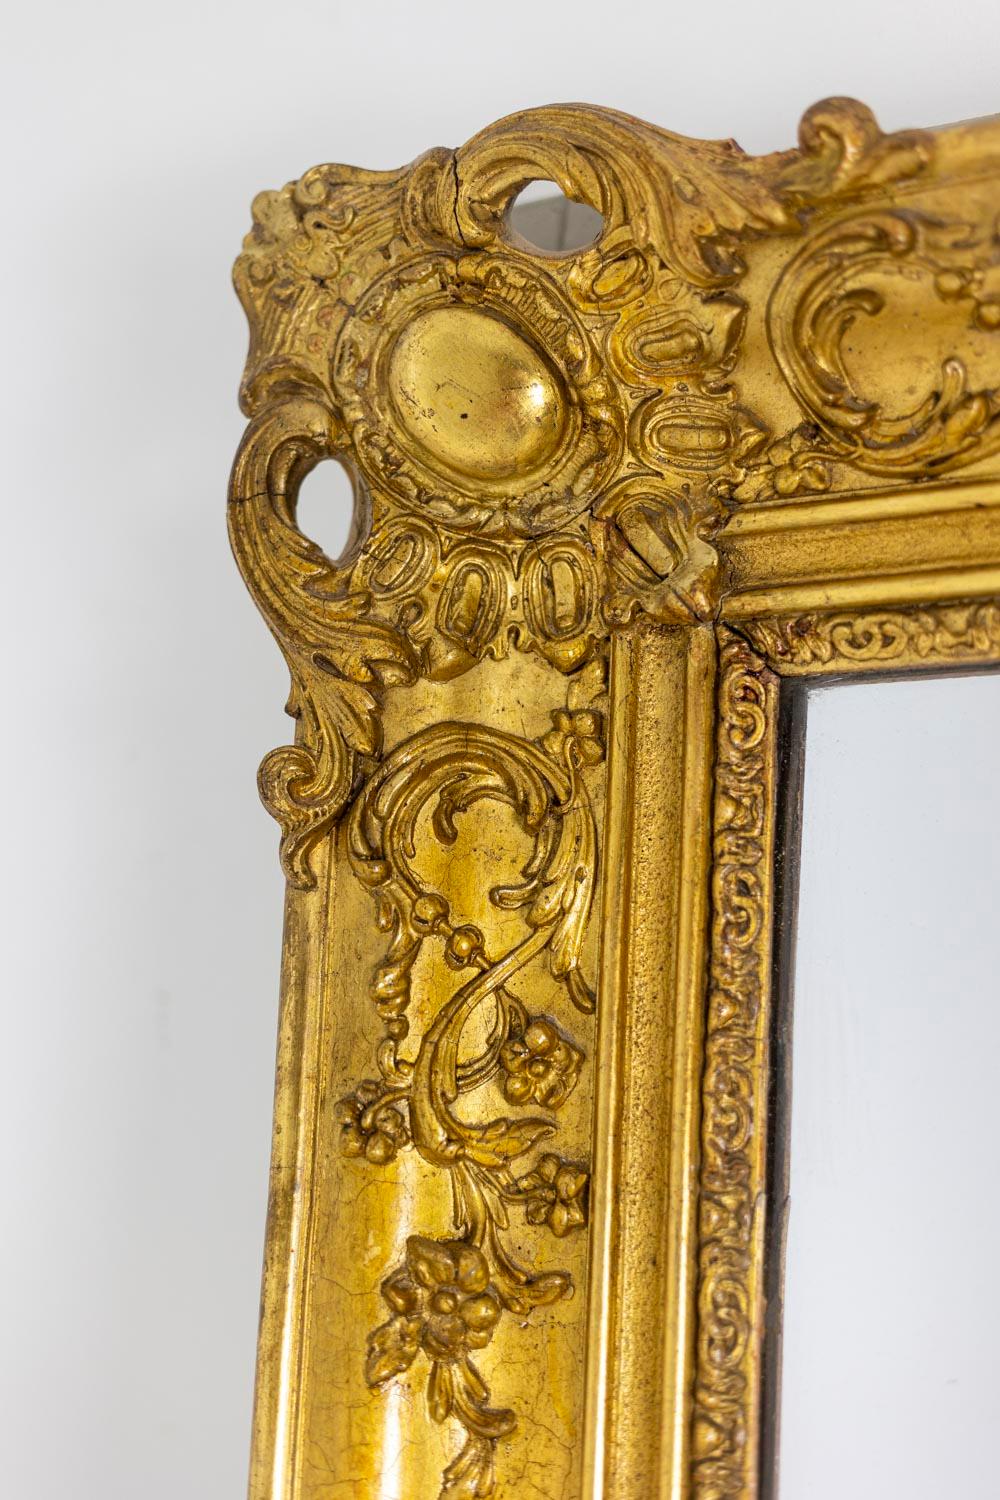 Regency style trumeau in wood and gilded stucco, adorned with cartouches at its four ends and adorned with garlands of foliage and flowers.

French work realized in the 19th century.

Dimensions : H 164 x W 100 x D 9 cm.